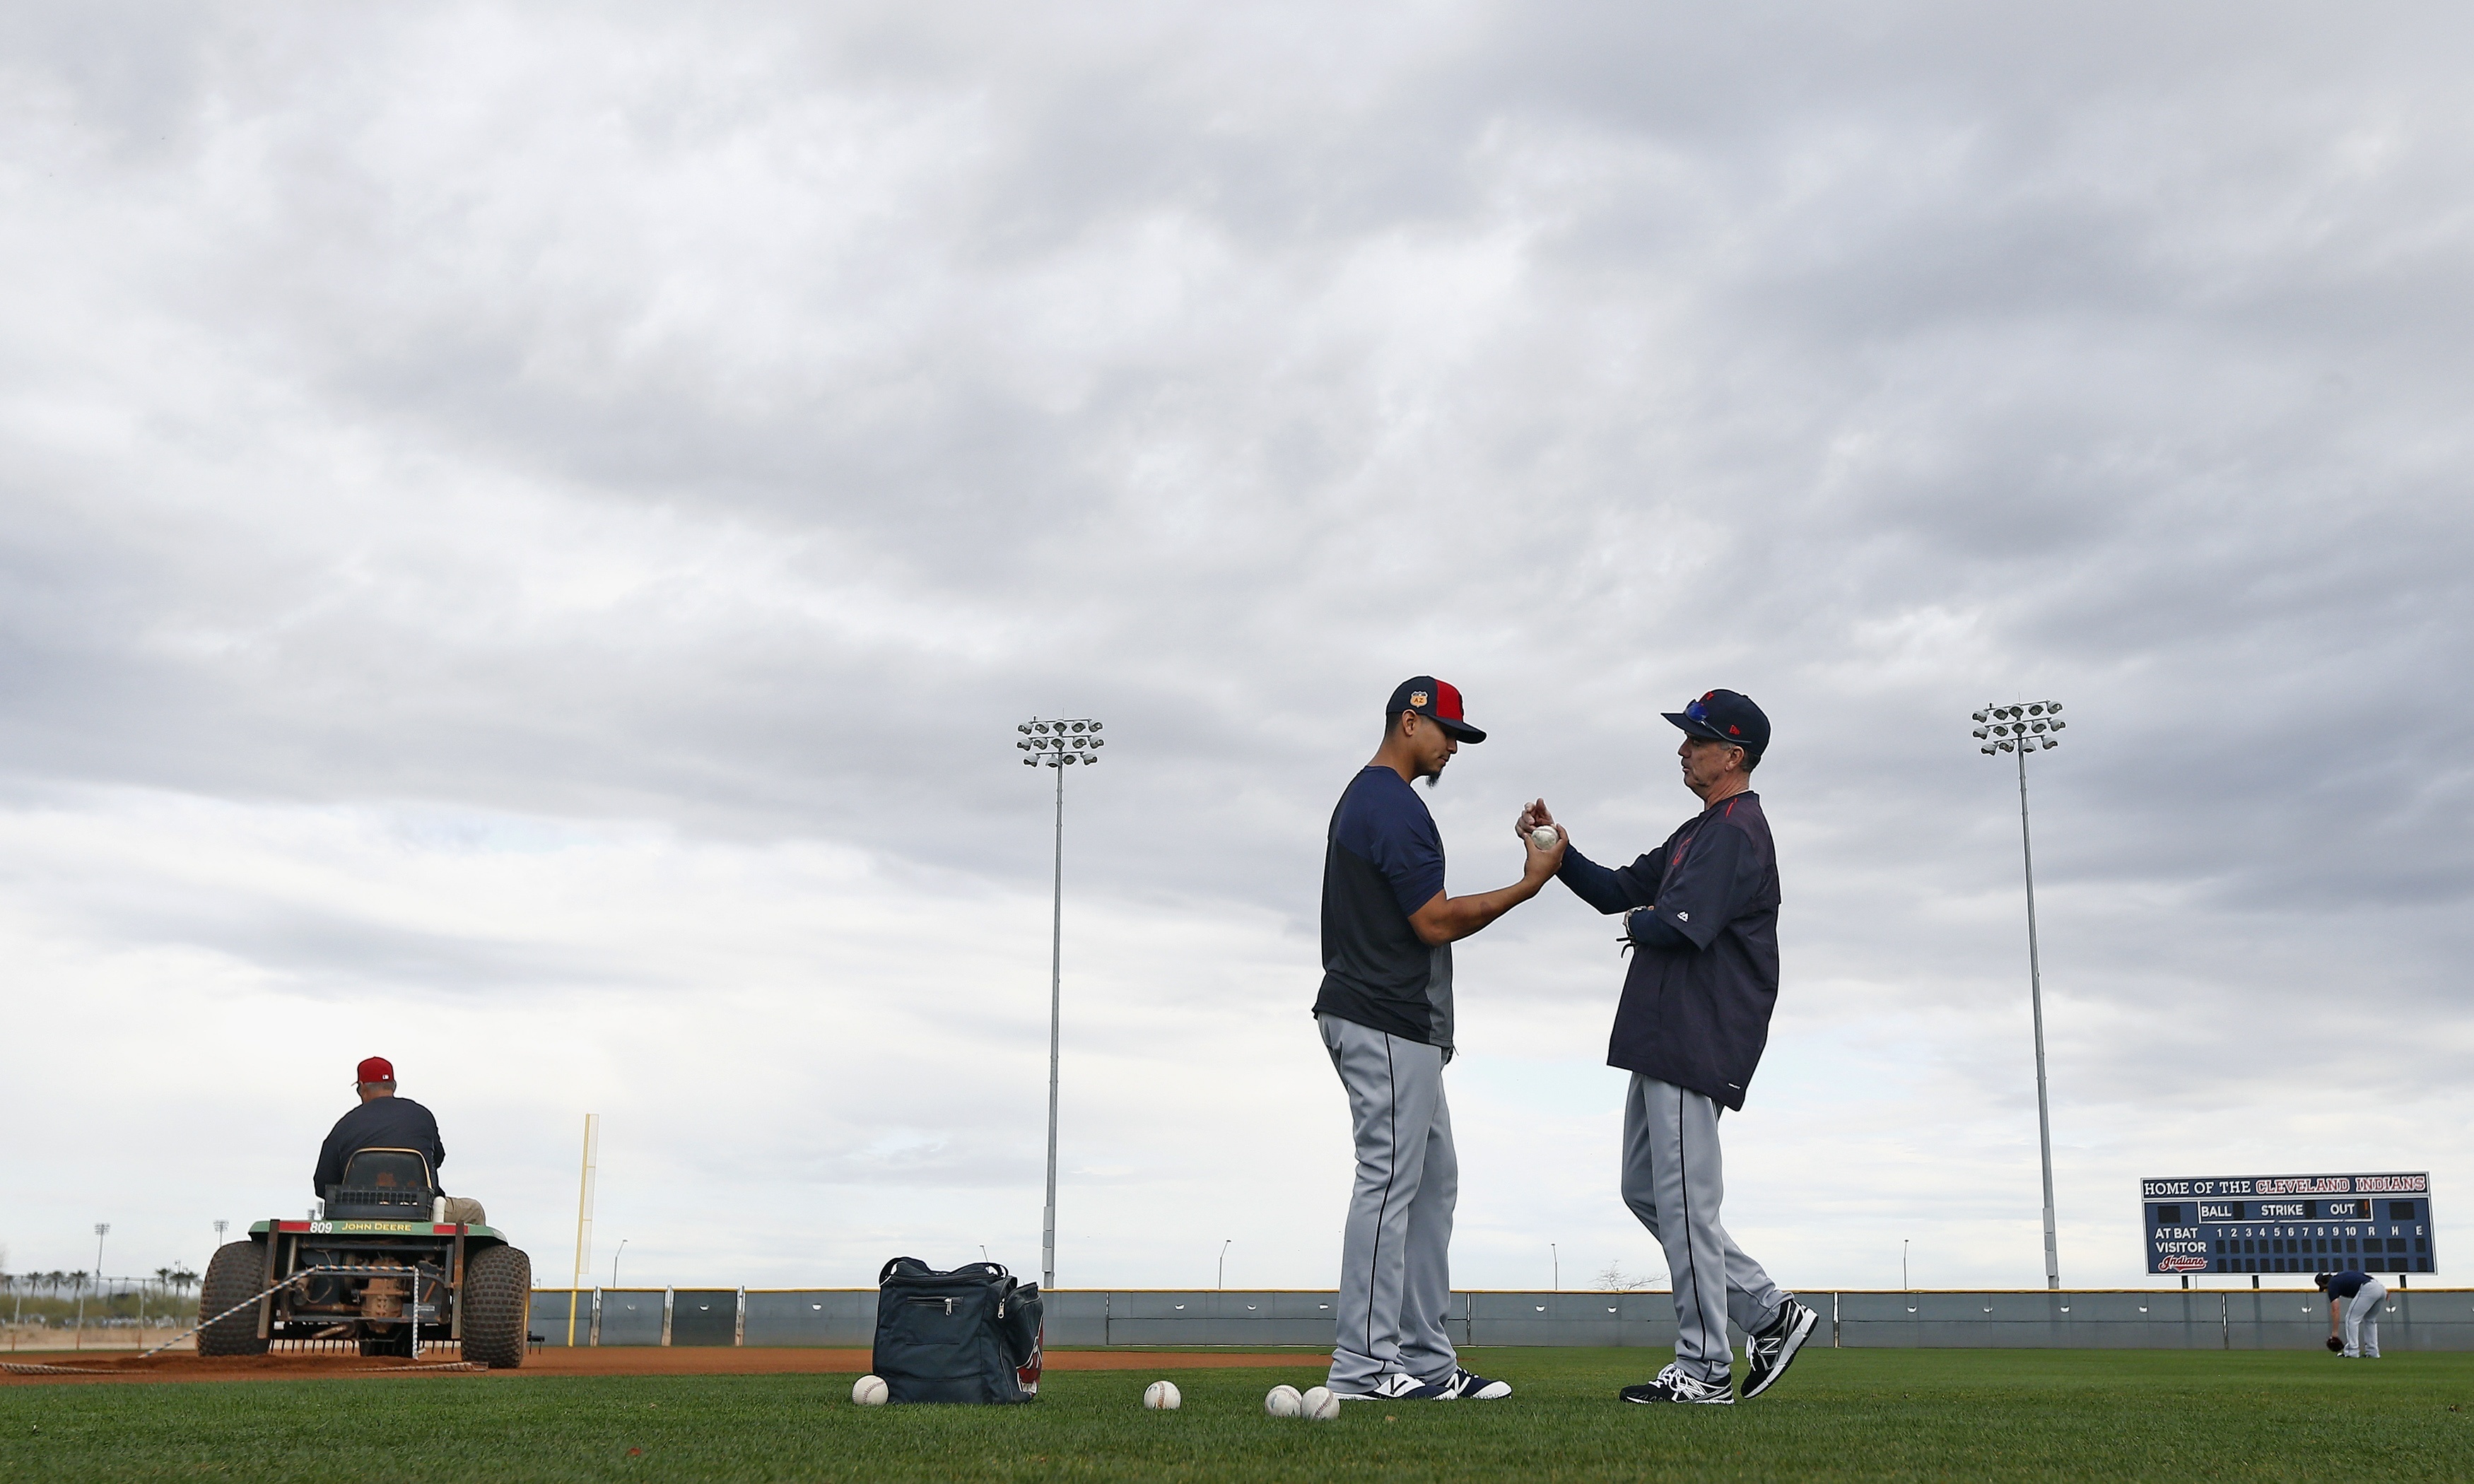 Cleveland Indians pitcher Carlos Carrasco talks with minor league pitching coach Tony Arnold, right, at the Indians baseball spring training facility Monday, Feb. 13, 2017, in Goodyear, Ariz. (AP Photo/Ross D. Franklin)